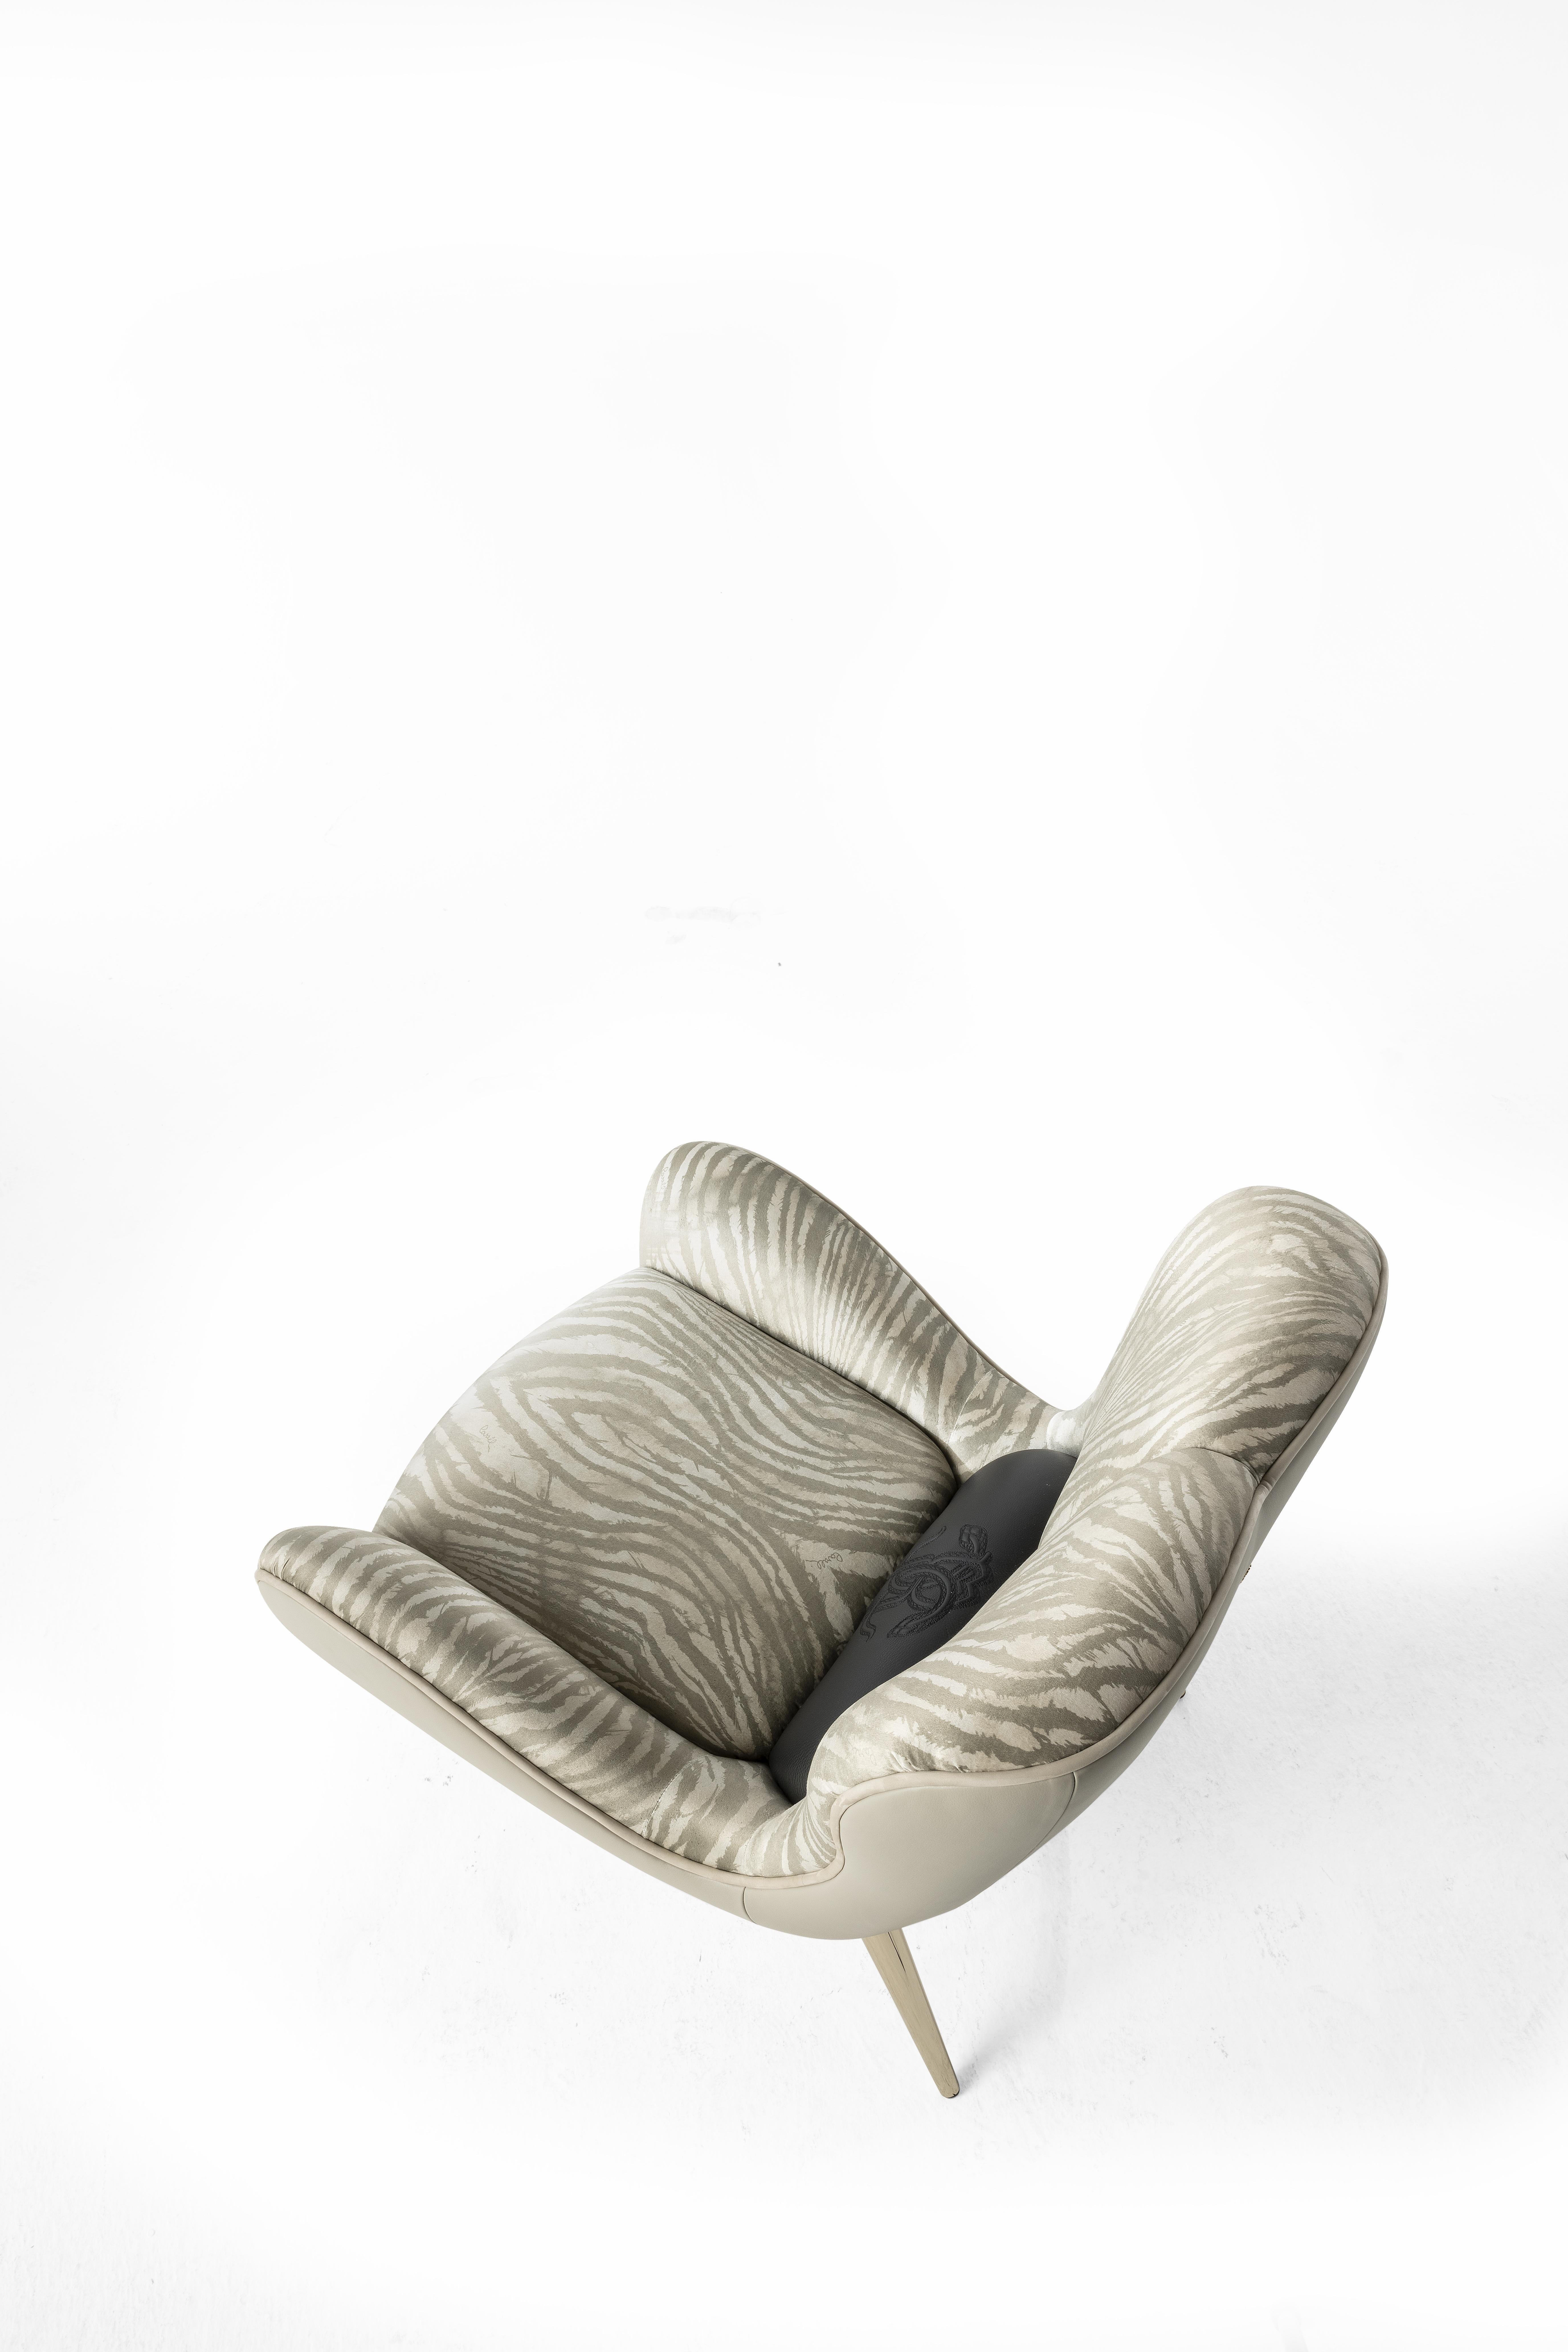 21st Century Tifnit Armchair in Leather by Roberto Cavalli Home Interiors In New Condition For Sale In Cantù, Lombardia